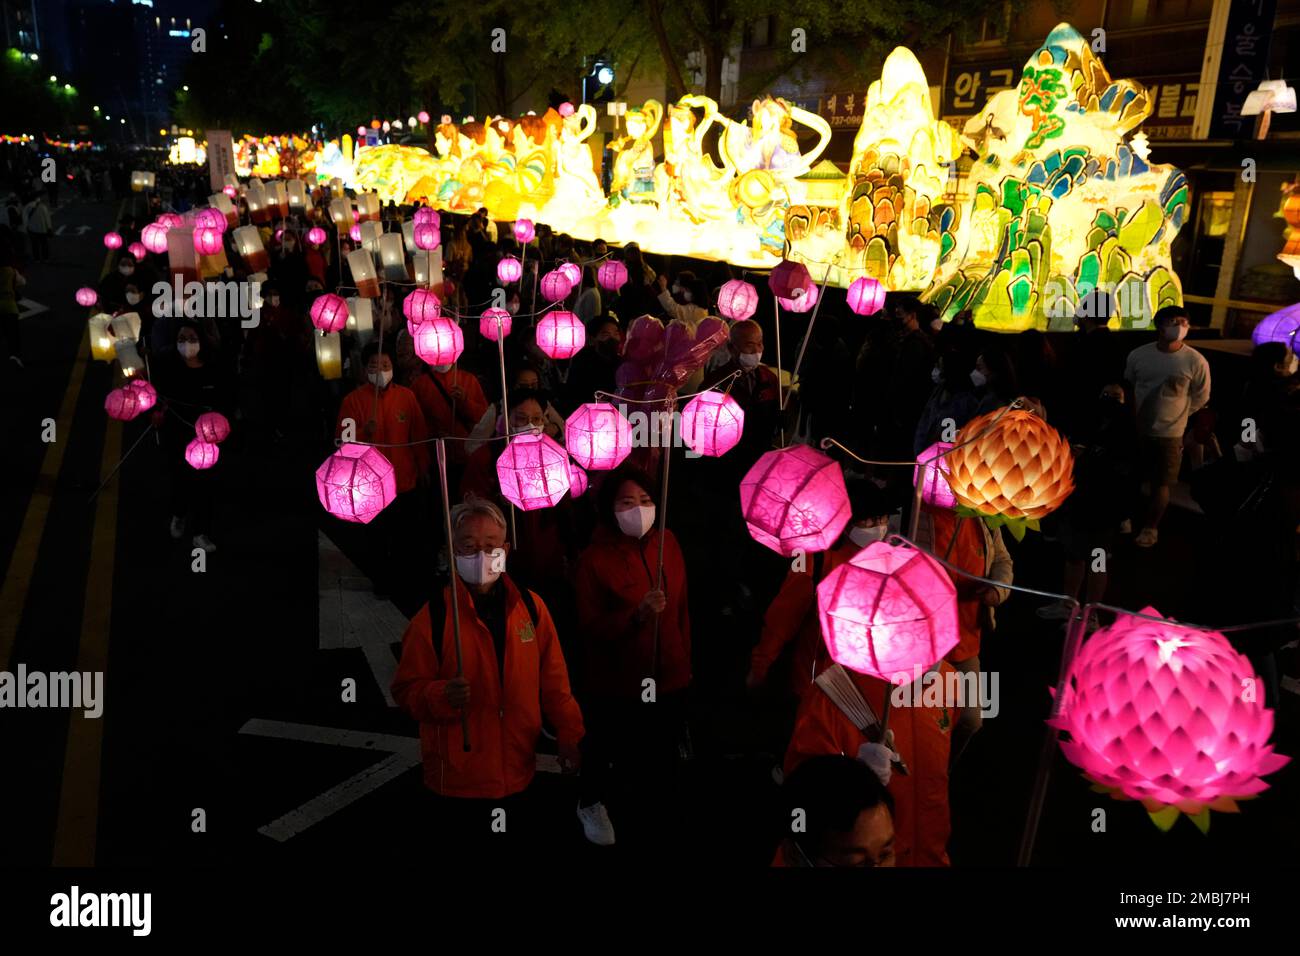 Buddhists carry lanterns in a parade during the Lotus Lantern Festival to celebrate the upcoming birthday of Buddha on May 8 in Seoul, South Korea, Saturday, April 30, 2022. (AP Photo/Lee Jin-man) Stock Photo